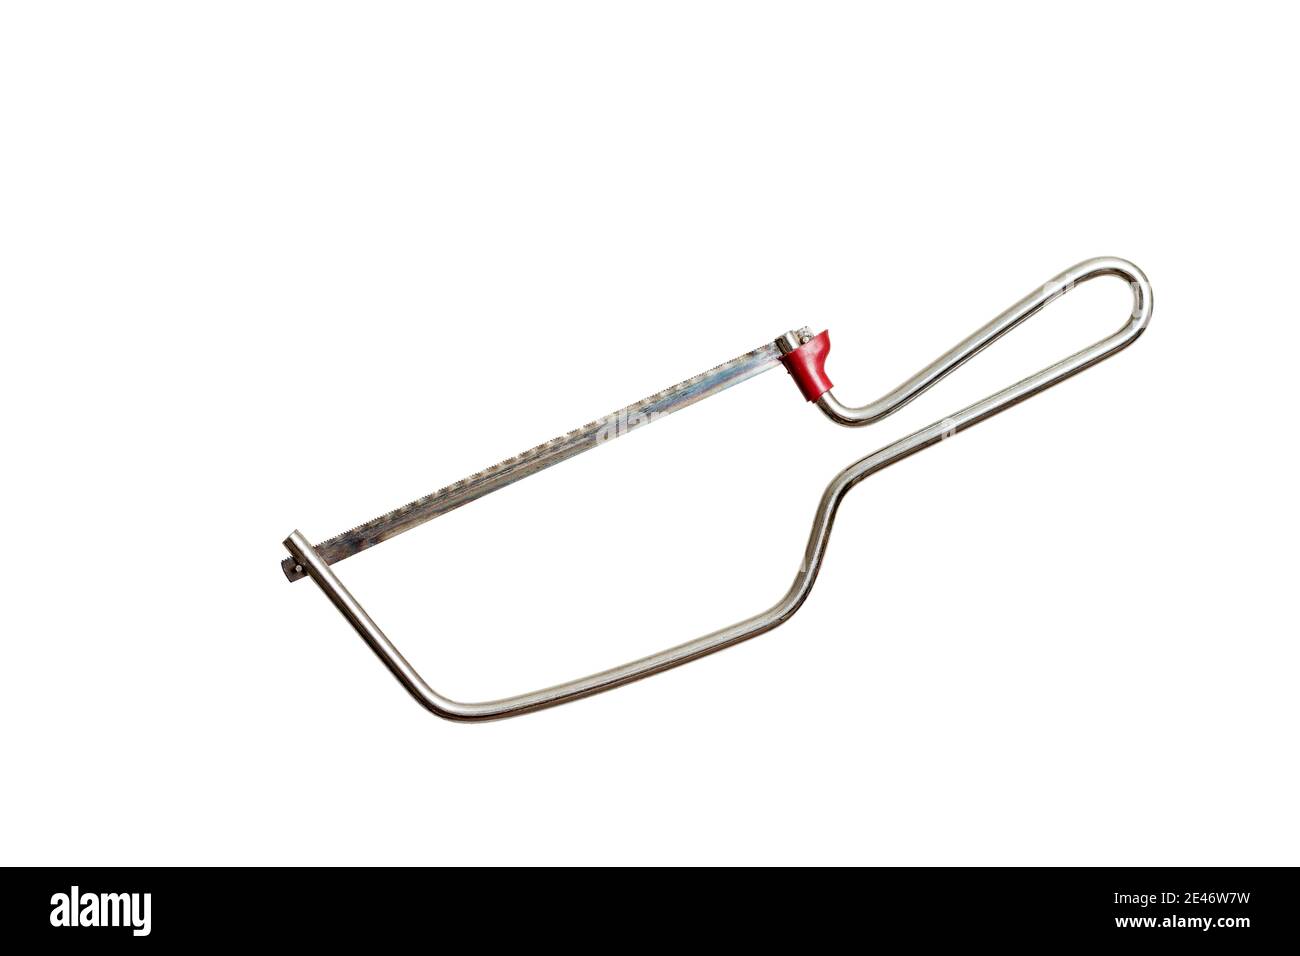 Antique junior hacksaw on a solid white background Stock Photo